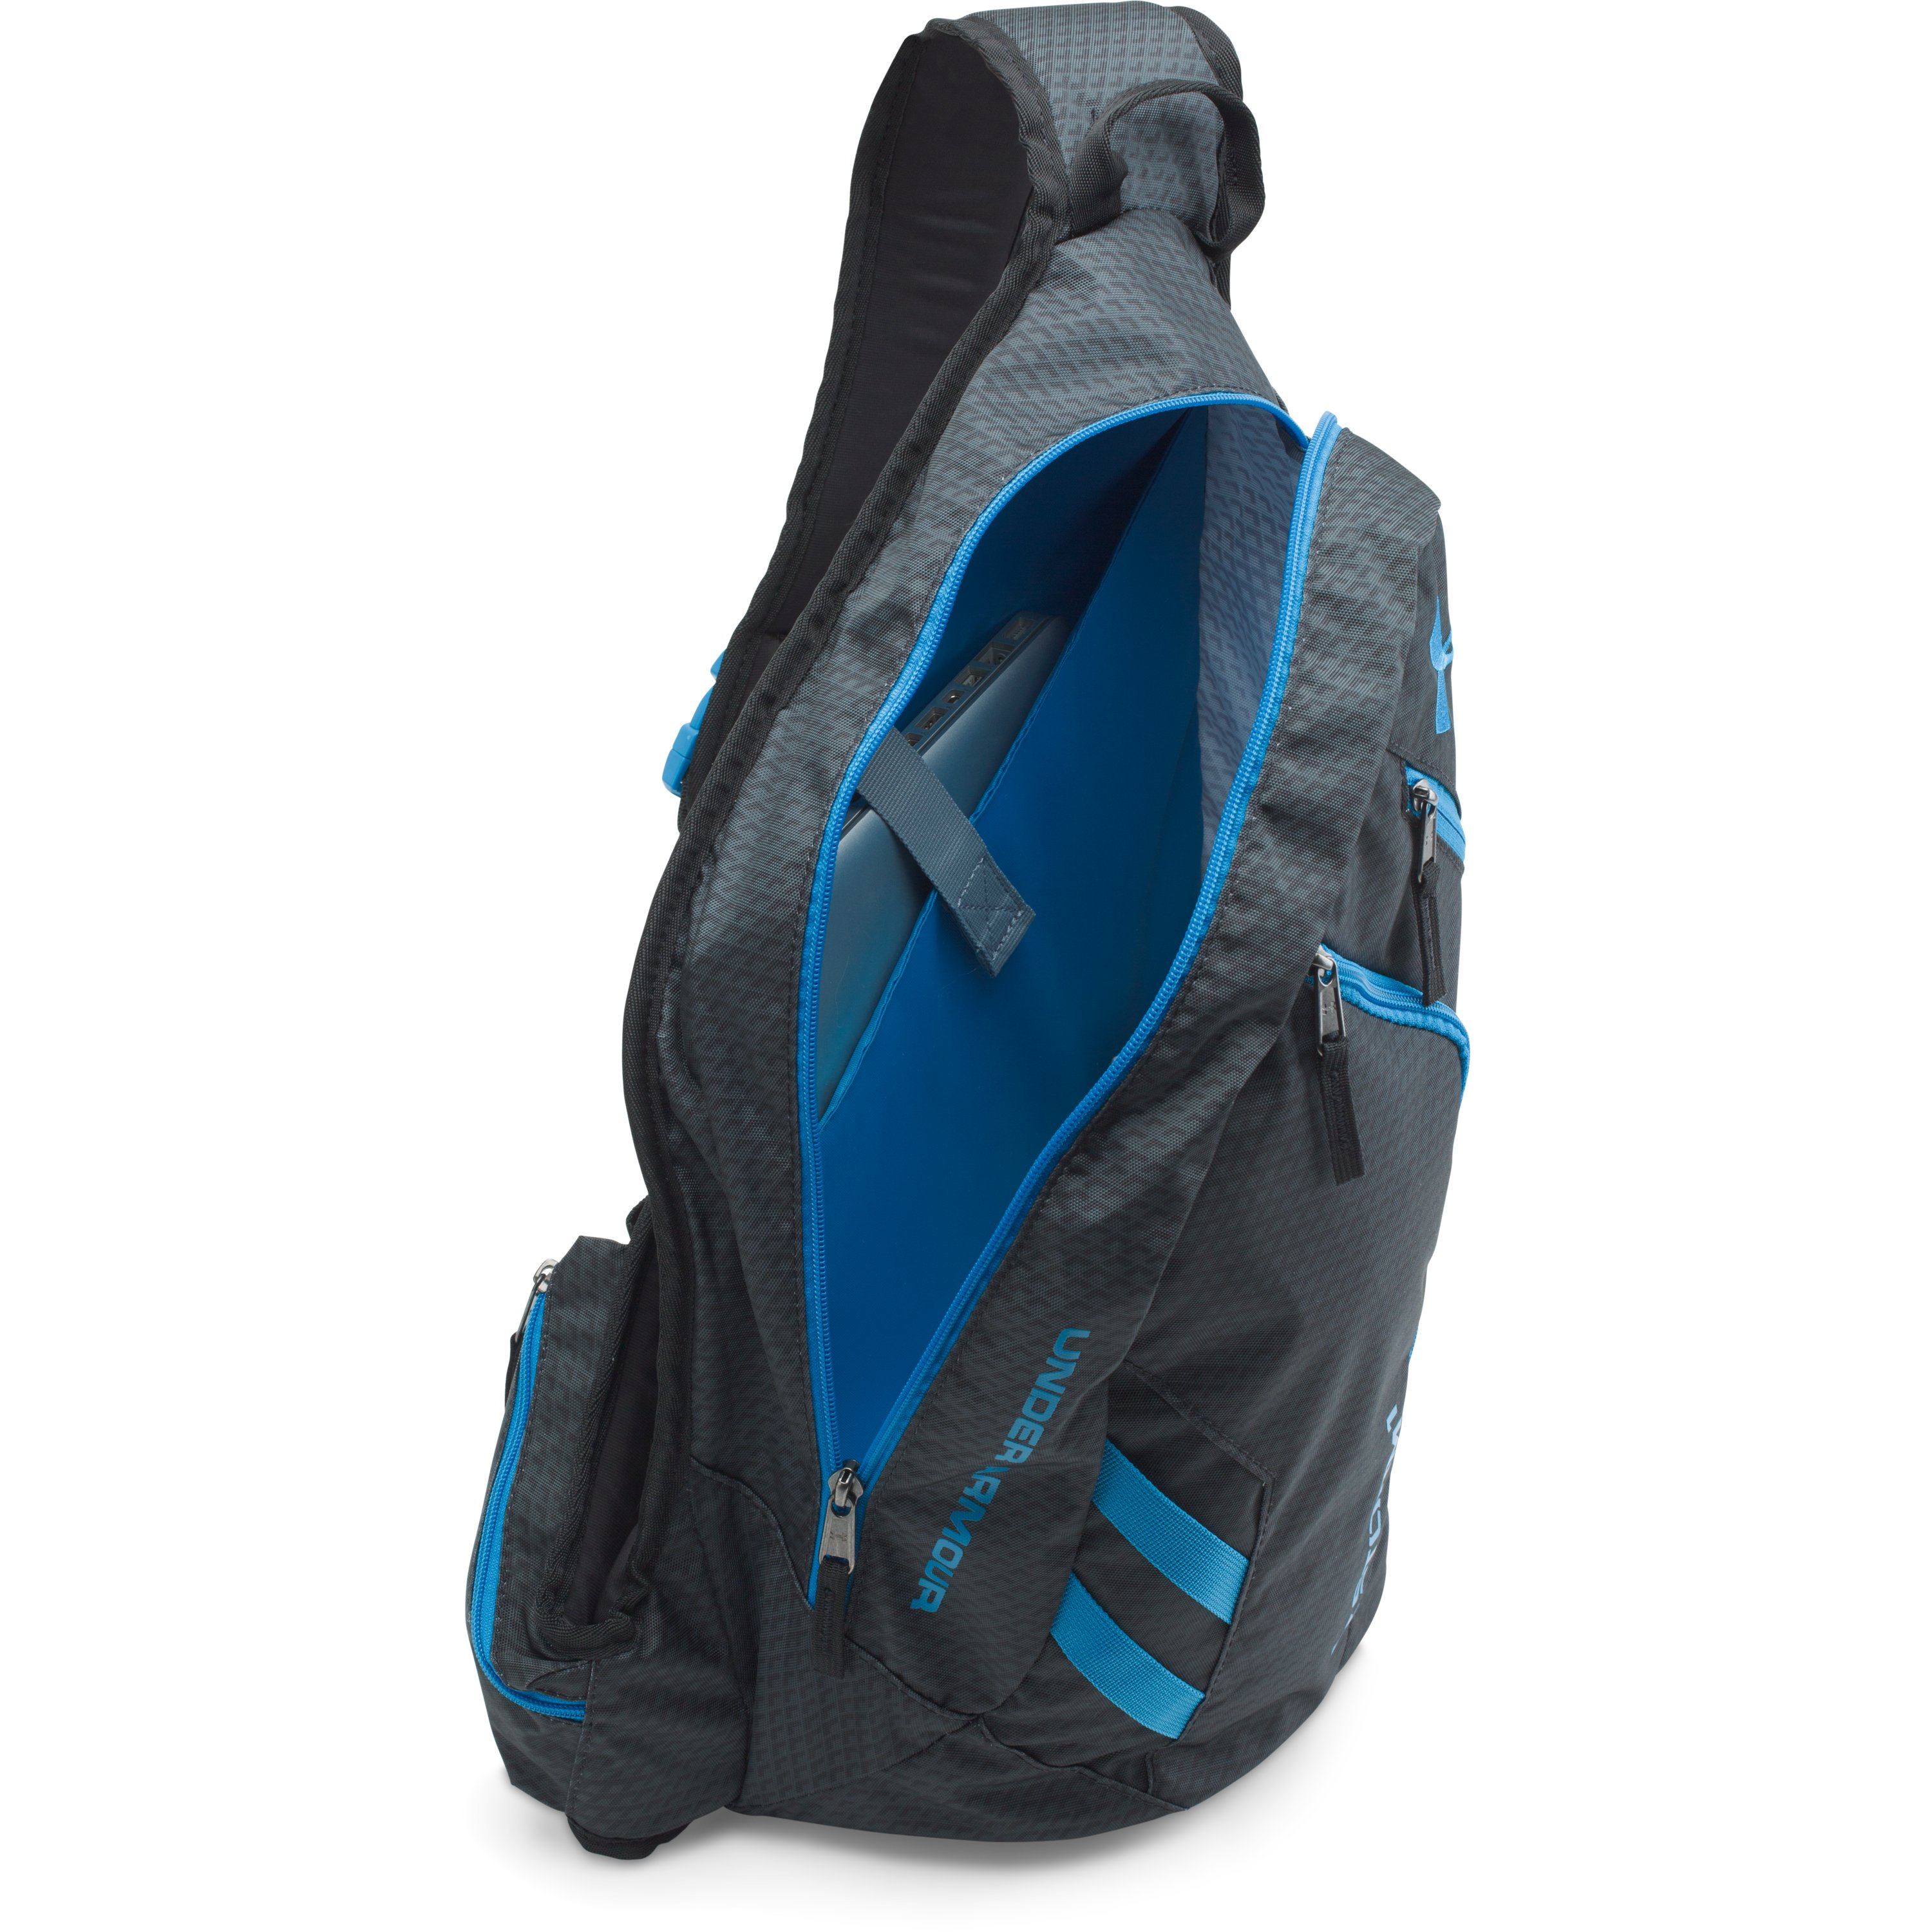 Under Armour Synthetic Ua Compel Sling 2.0 Backpack in Blue for Men - Lyst